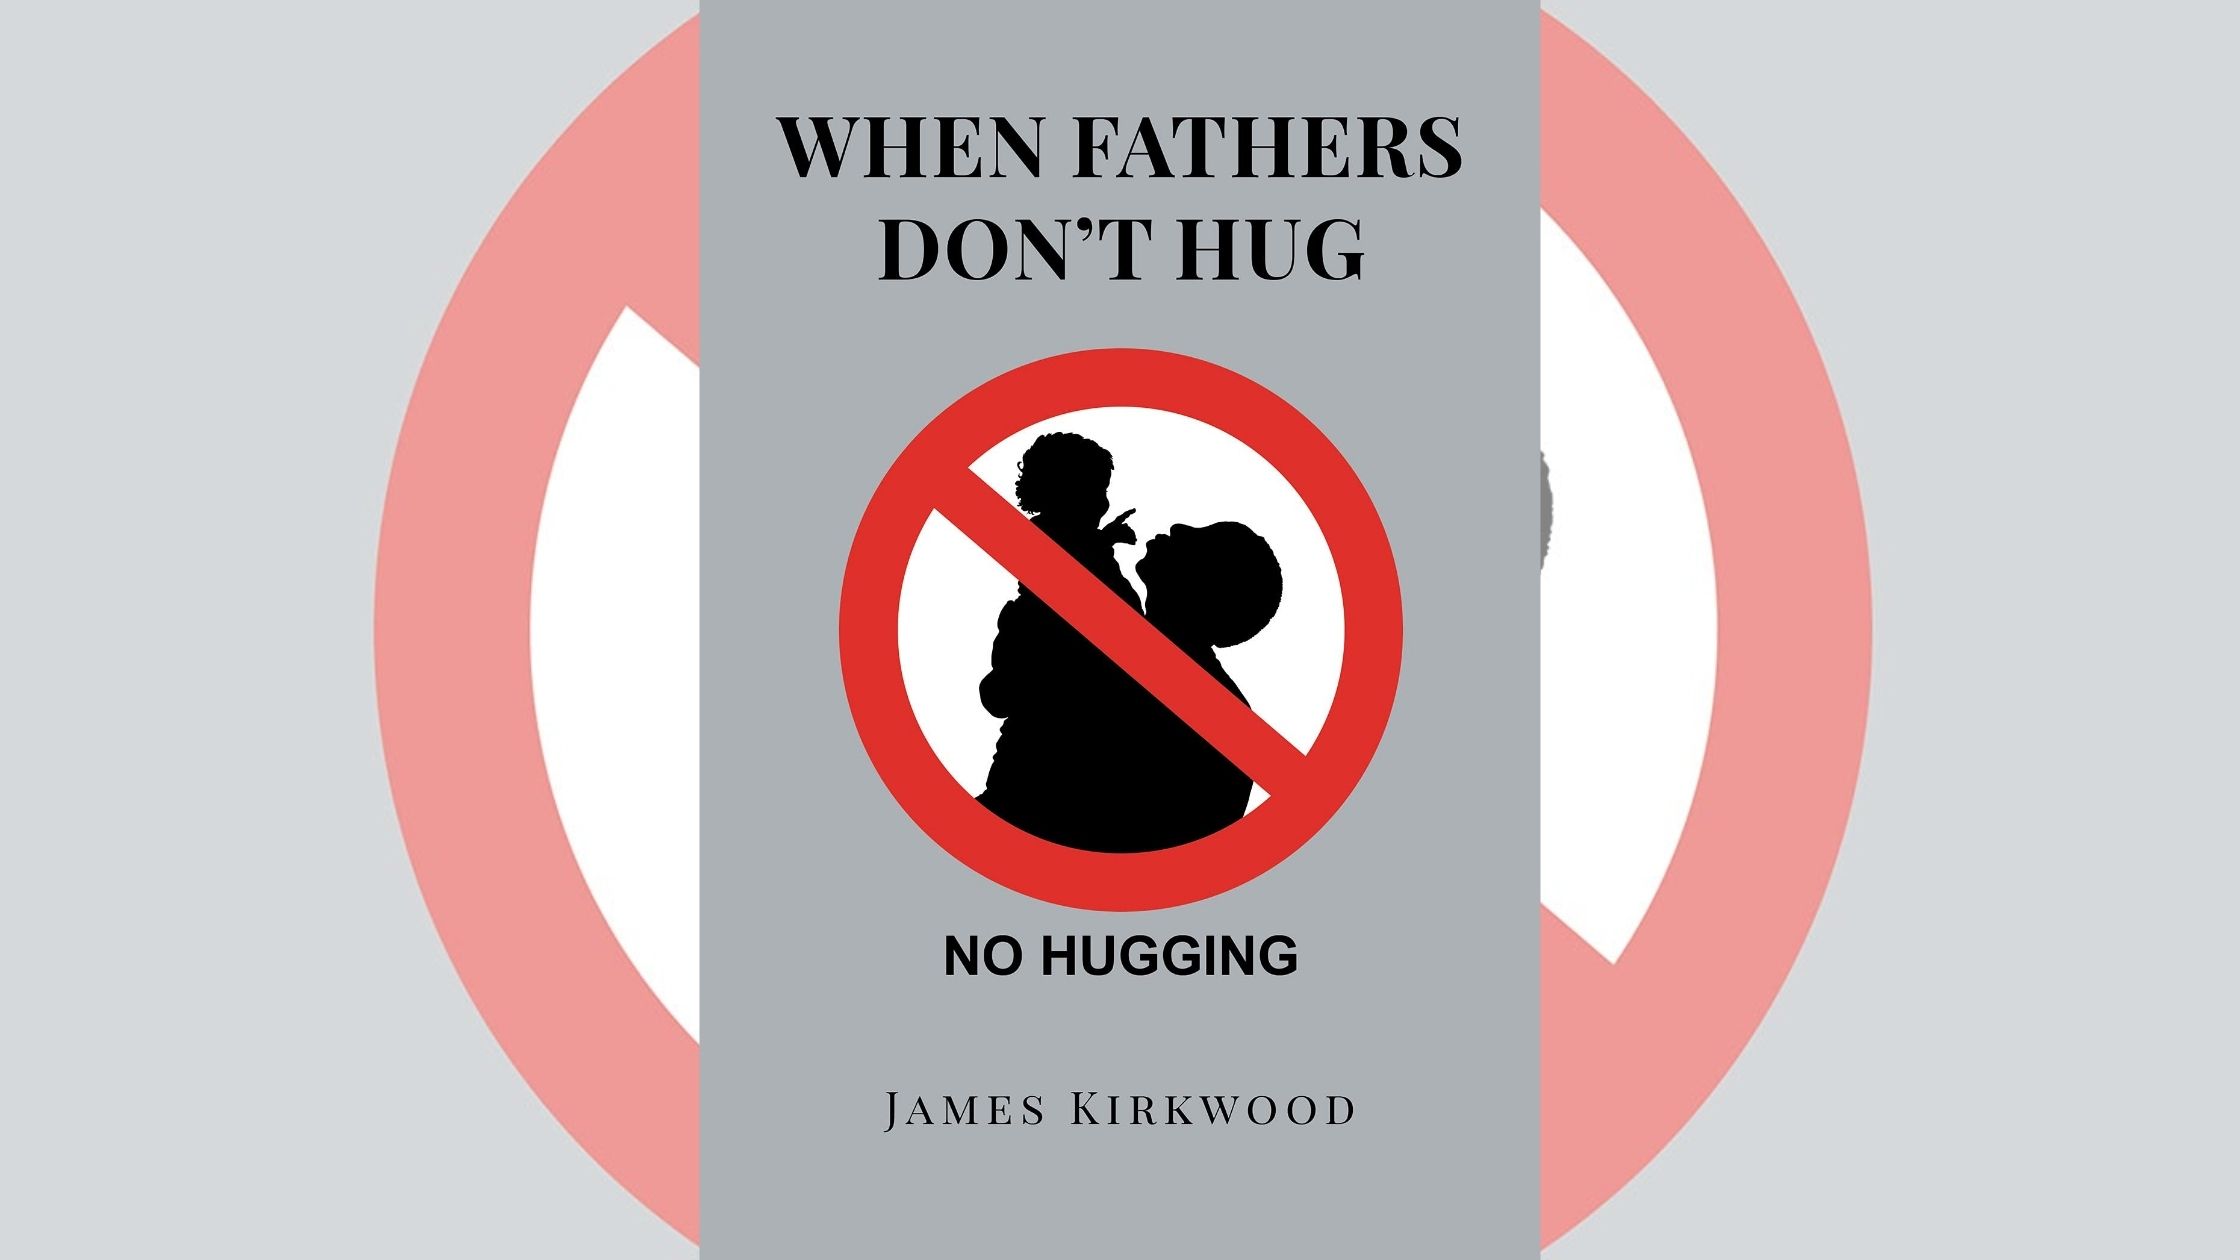 Author James Kirkwood’s new book “When Fathers Don’t Hug” is an inspirational memoir about how fathers may have an everlasting influence on one’s life.